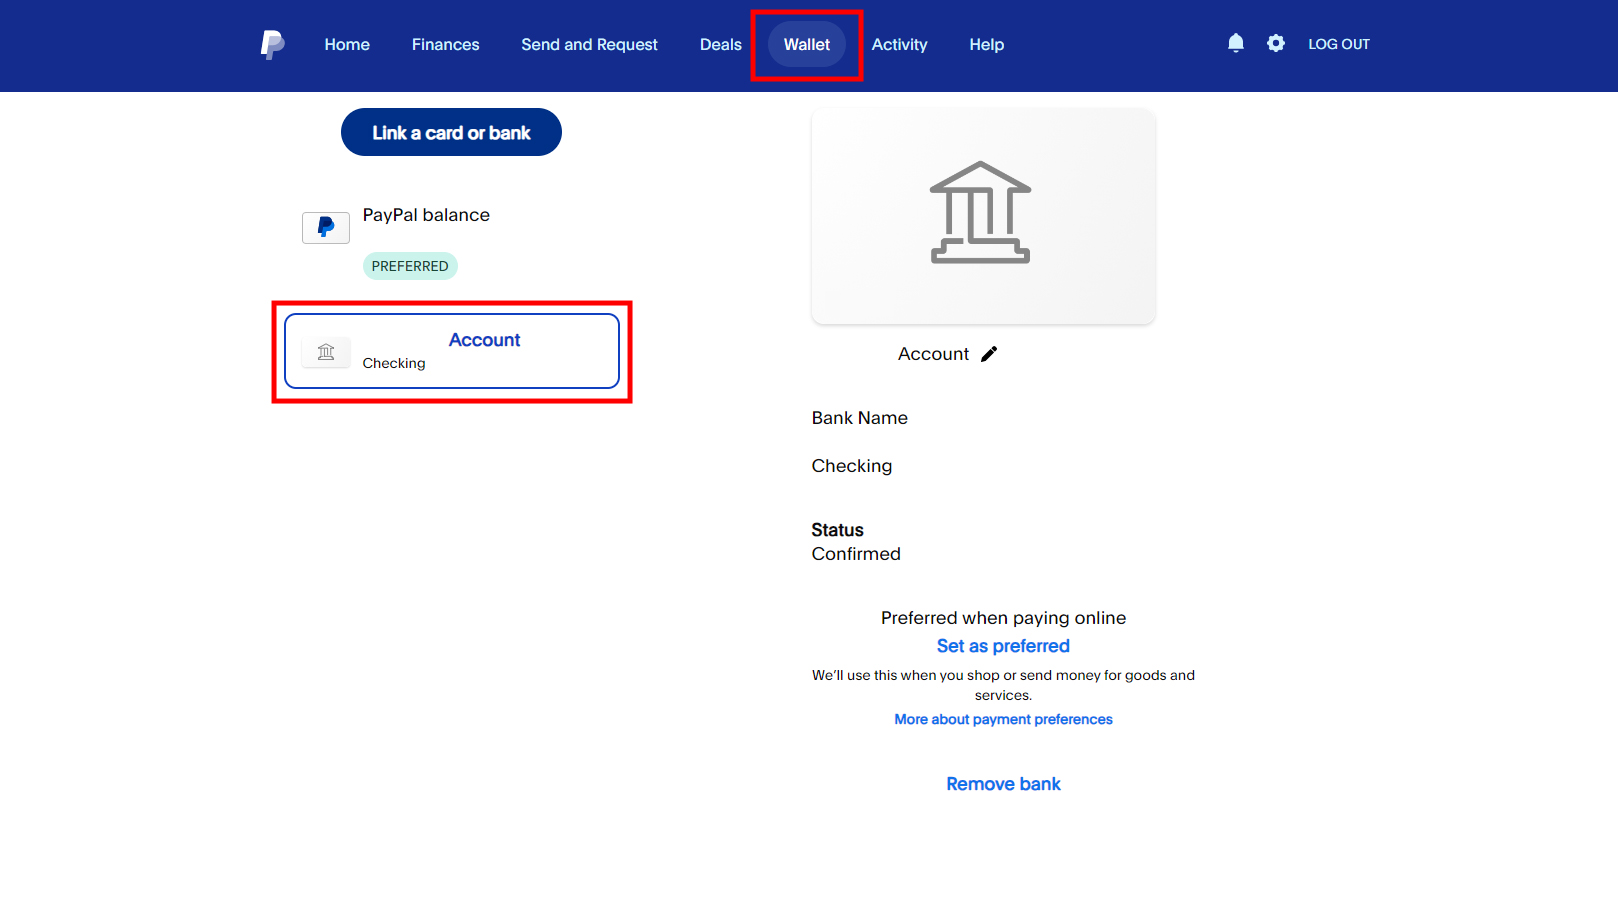 How to check your bank or cards on PayPal